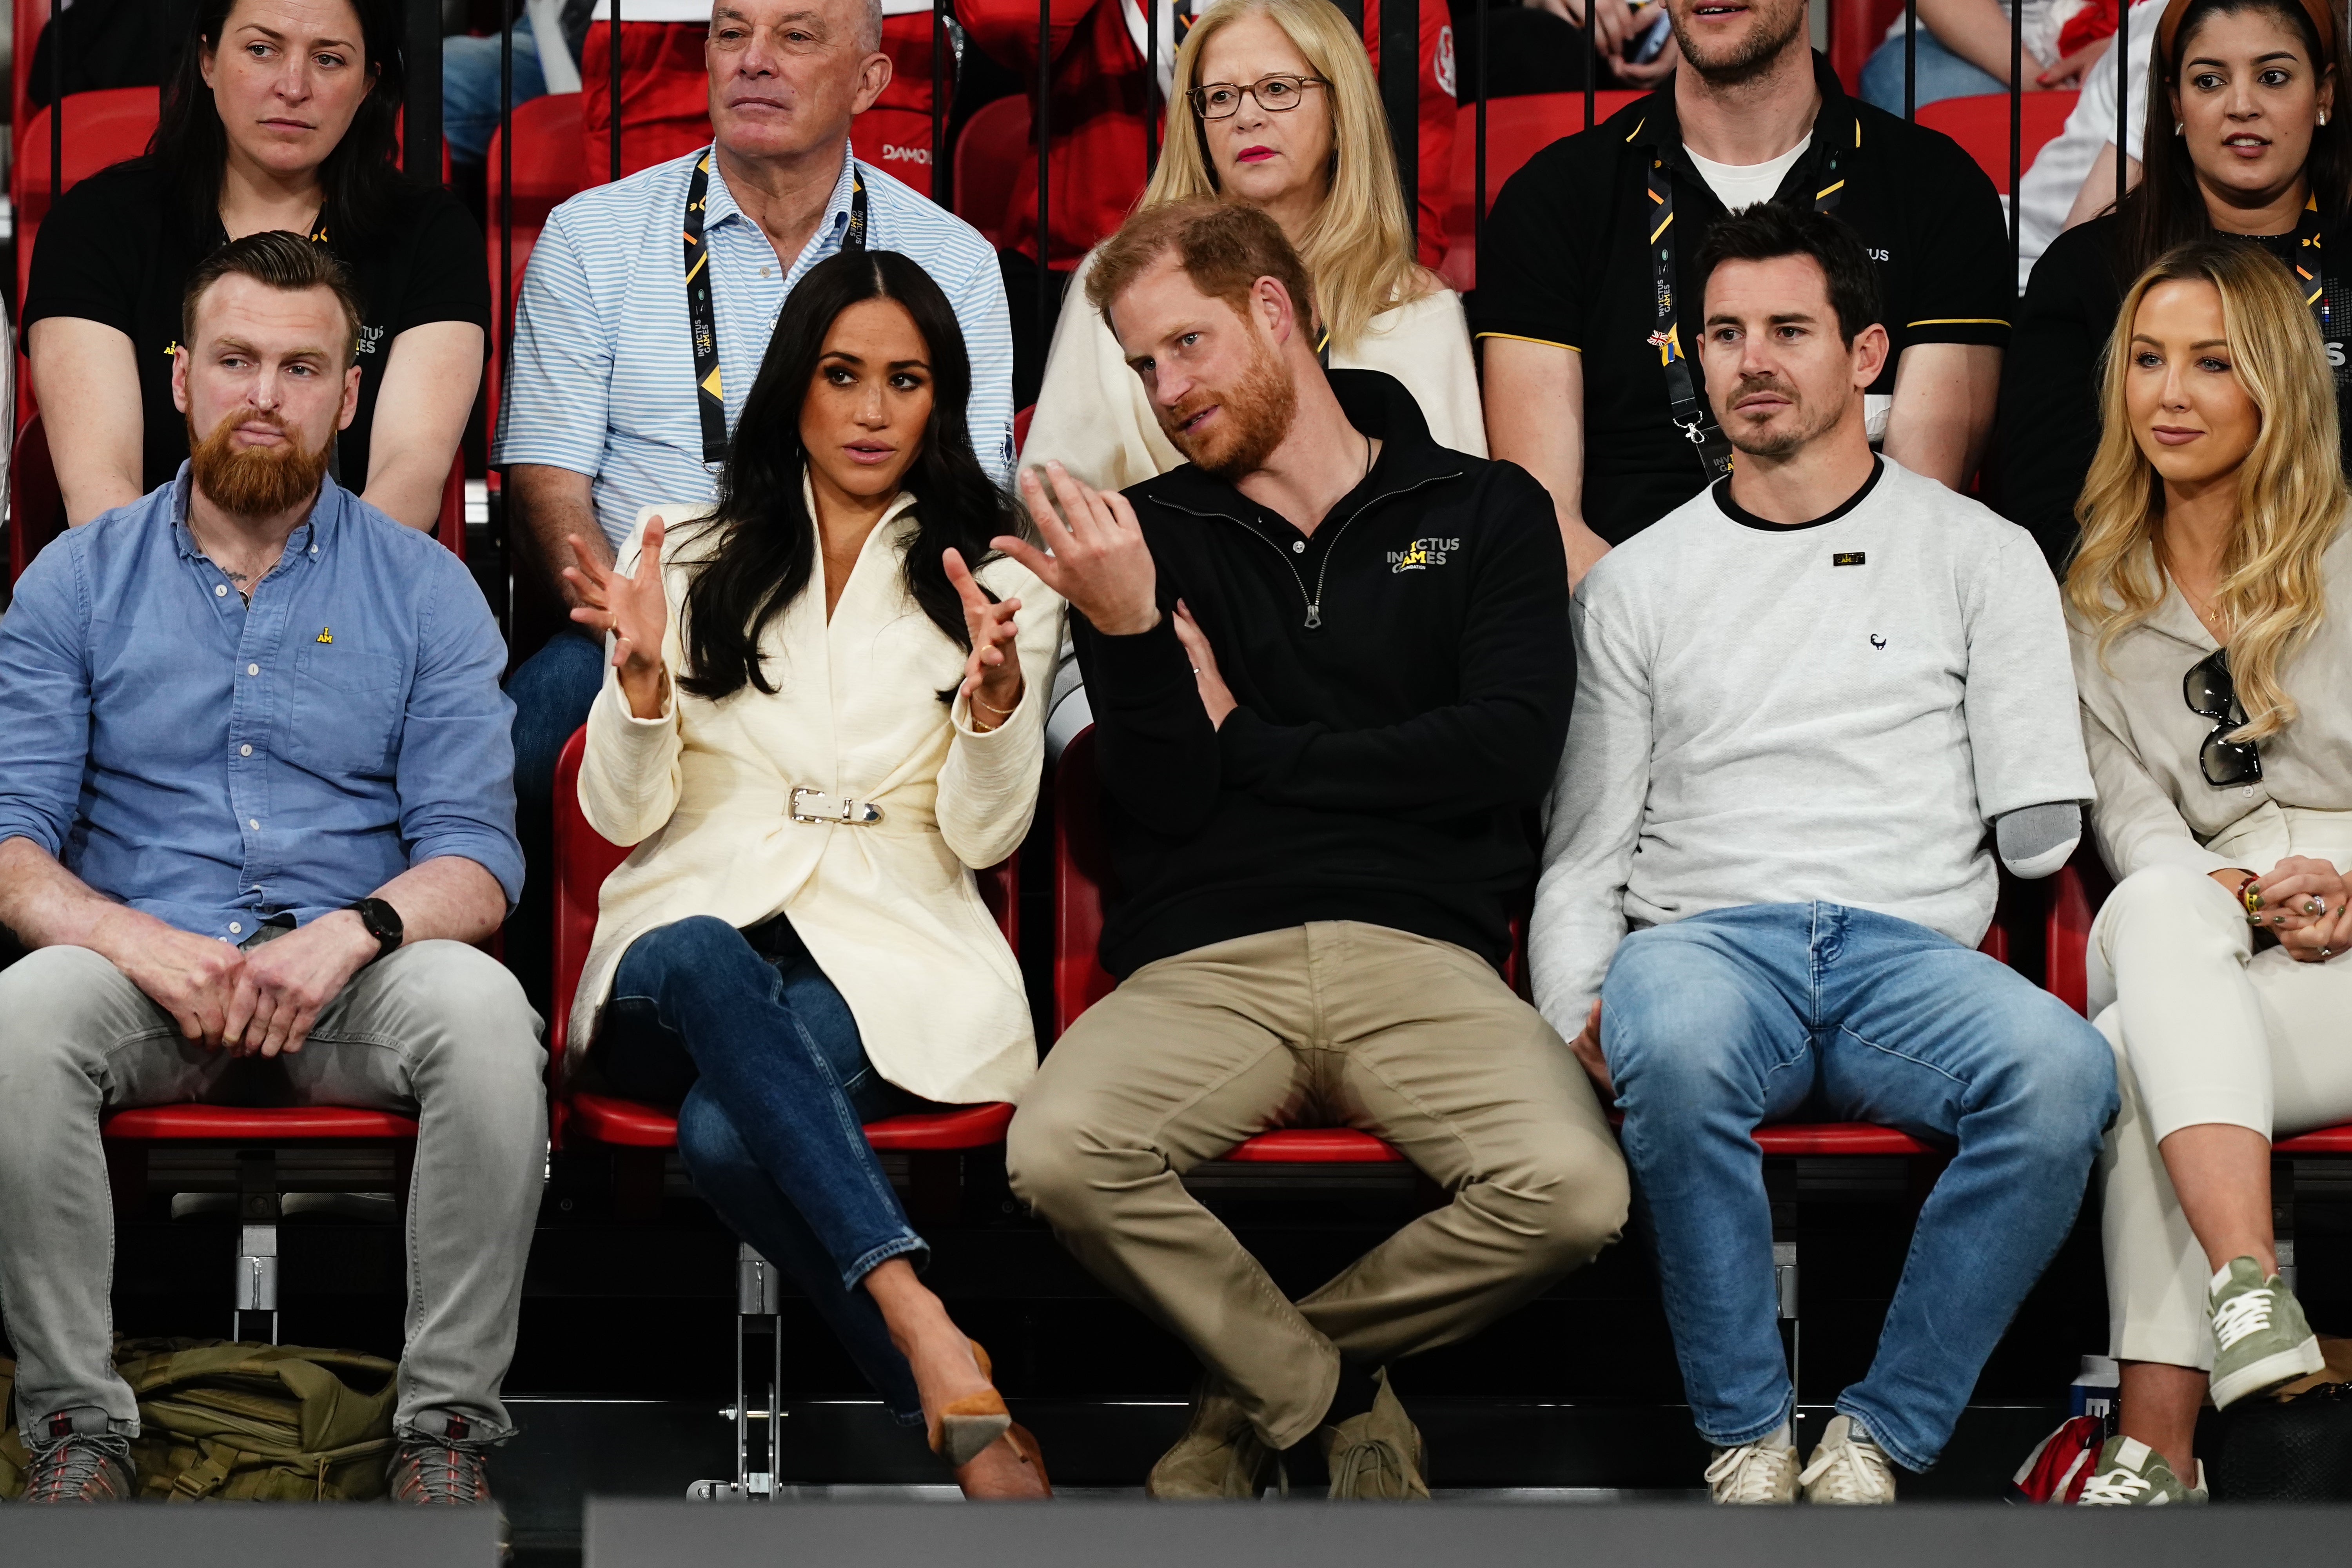 The Duke and Duchess of Sussex are currently attending the Invictus Games in The Hague (Aaron Chown/PA)